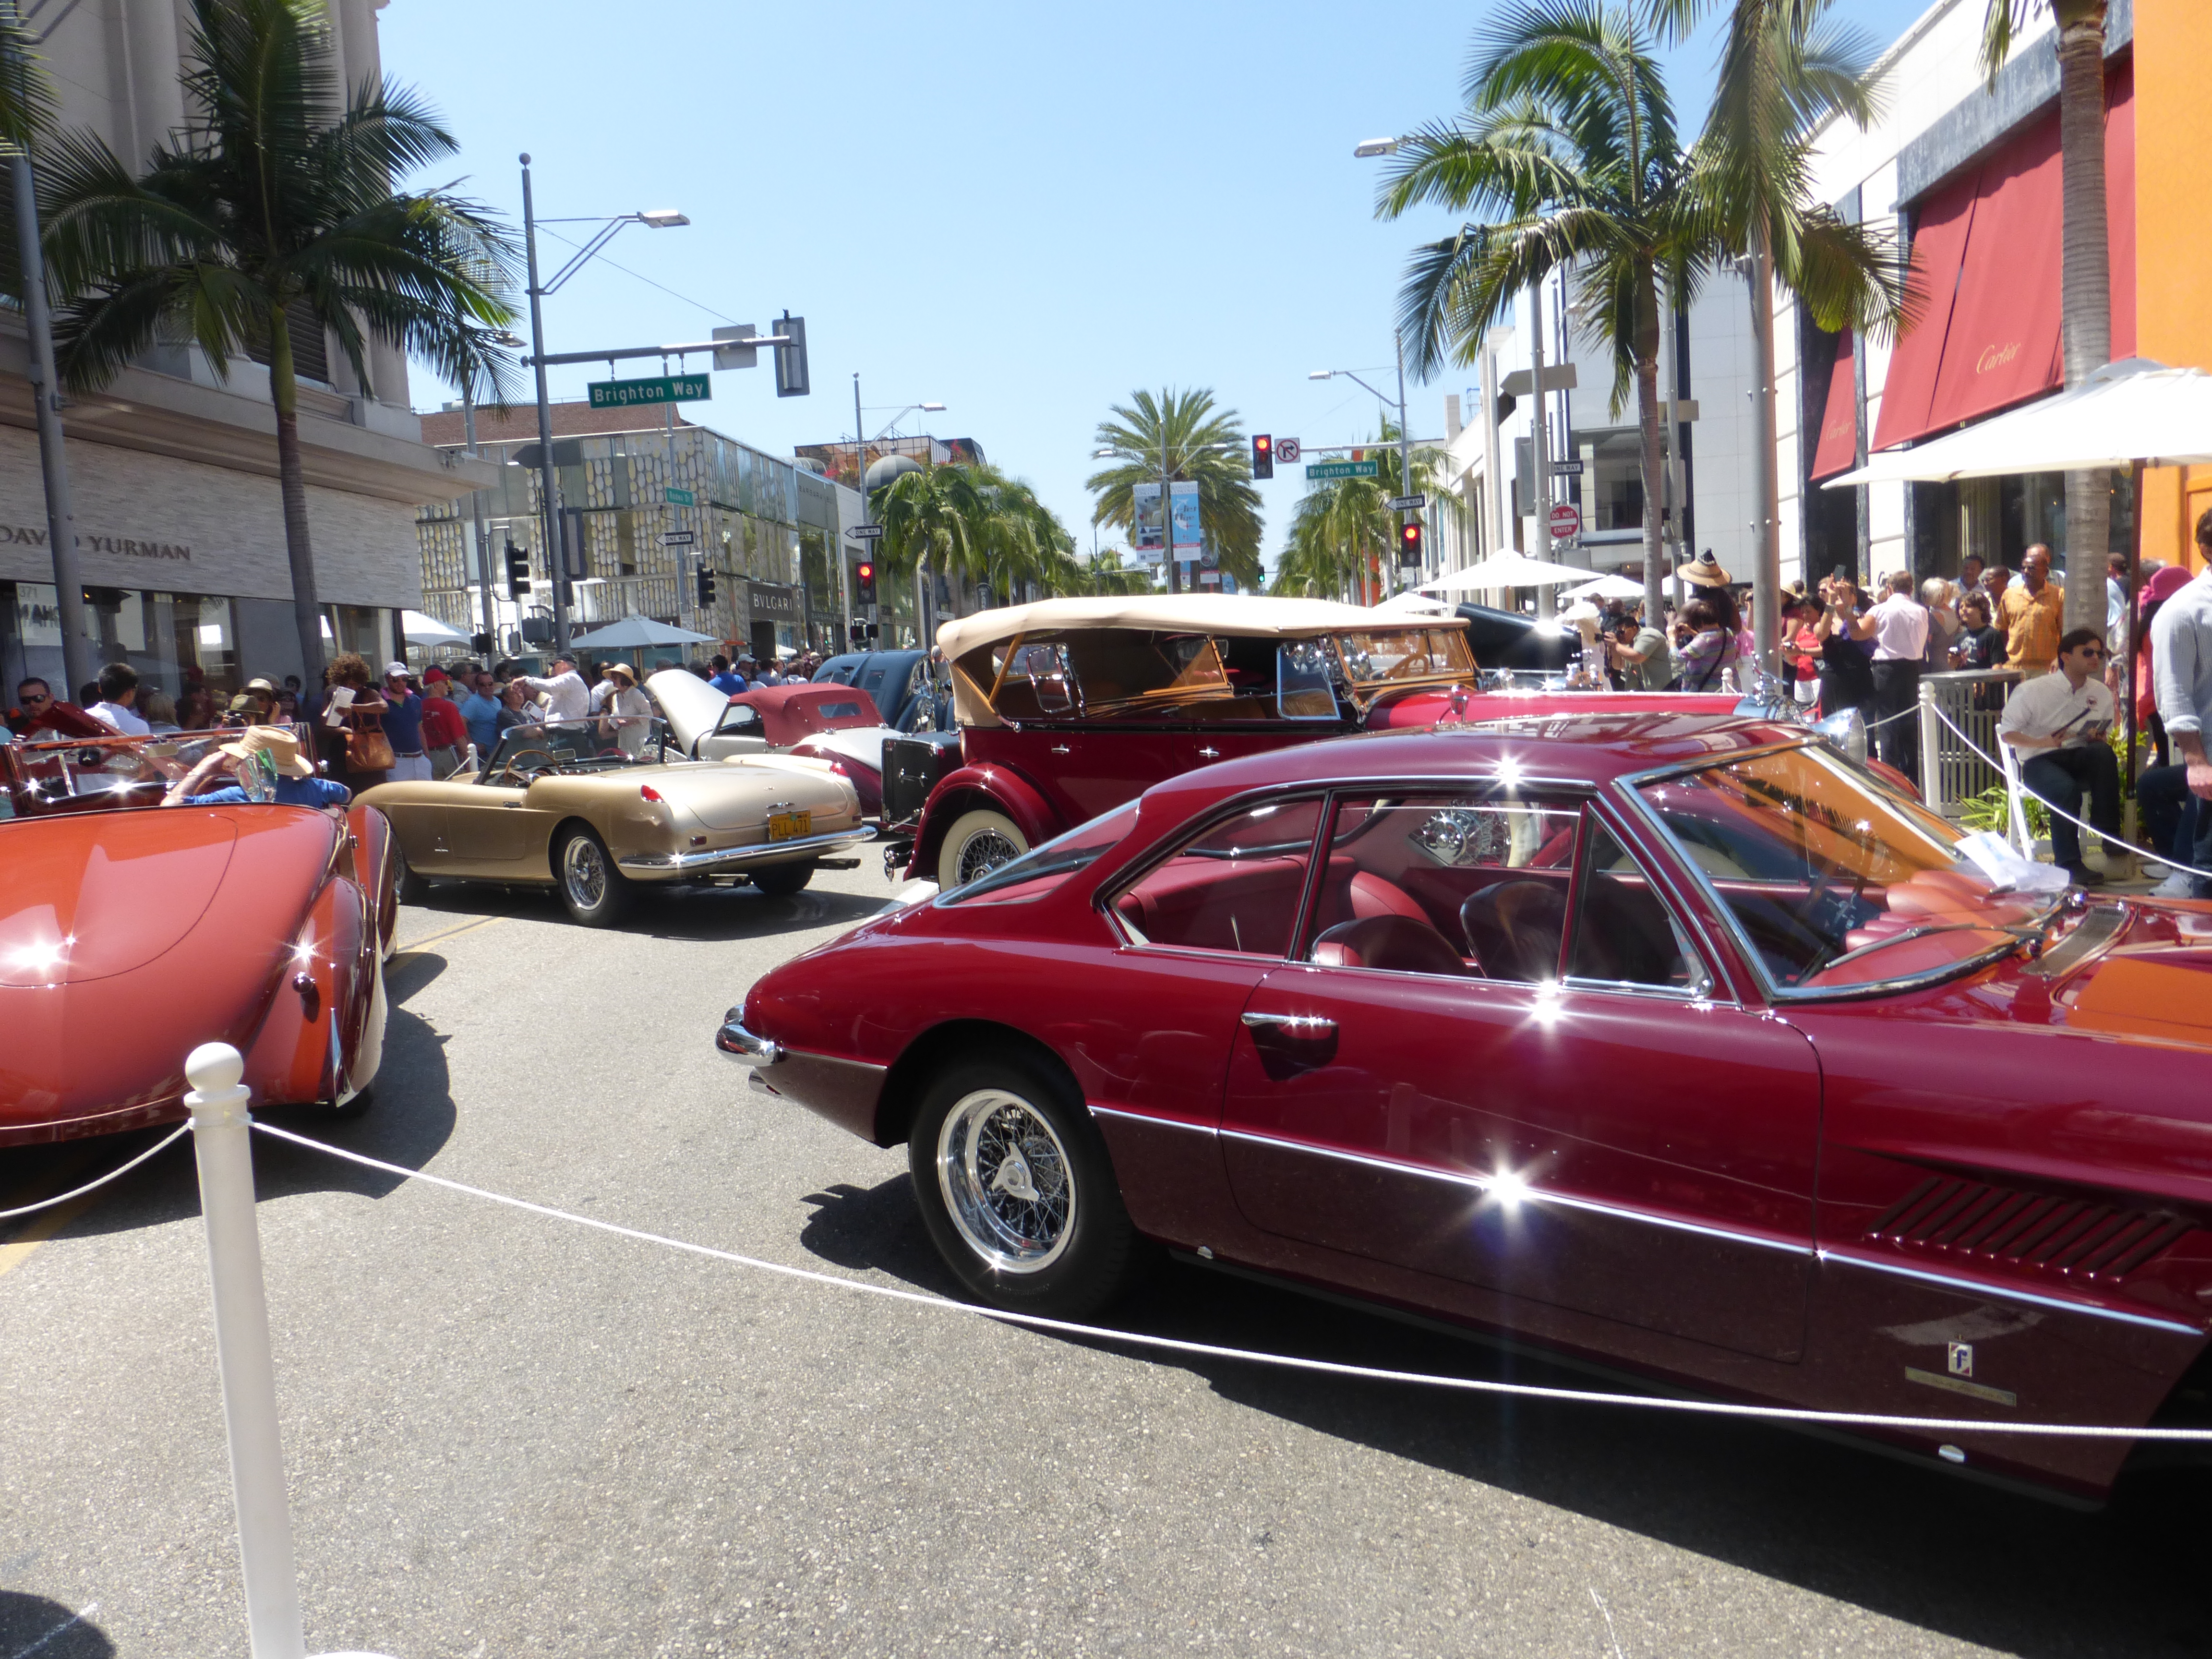 Private Jet Travel Never Looked So Good: Concours D’Elegance Fathers Day Festivities in Beverly ...